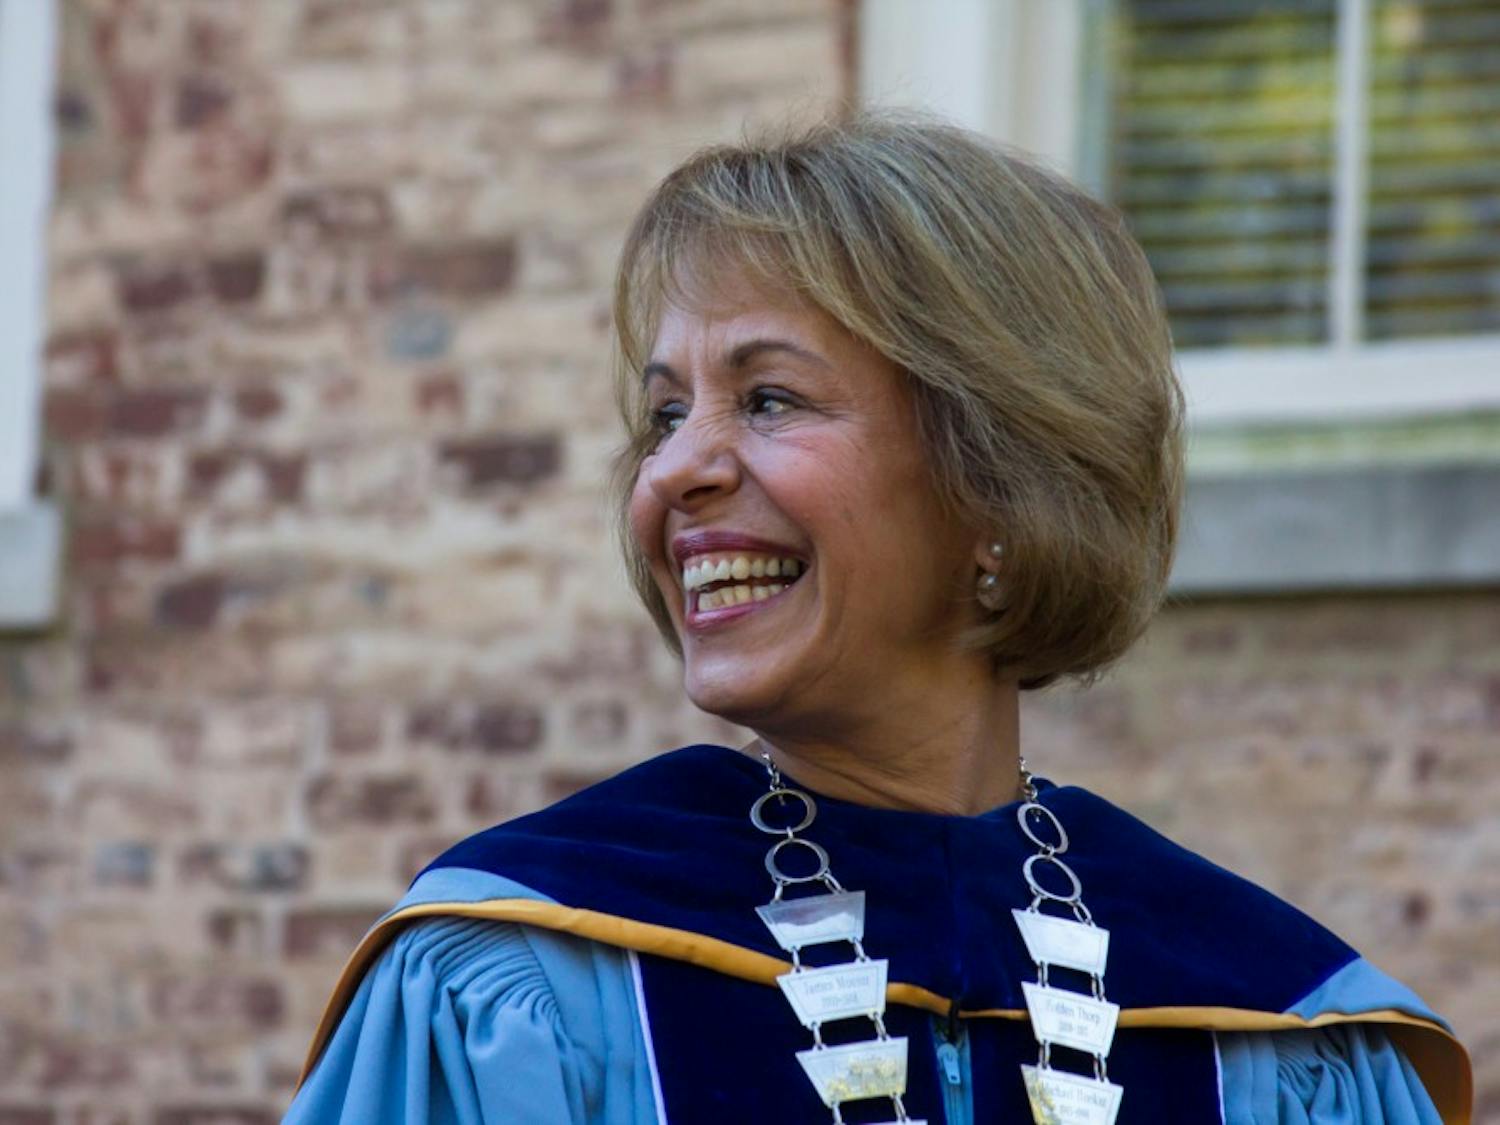 Chancellor Carol Folt smiles as she walks in the University Day procession from South Building to Memorial Hall on October 11, 2016.